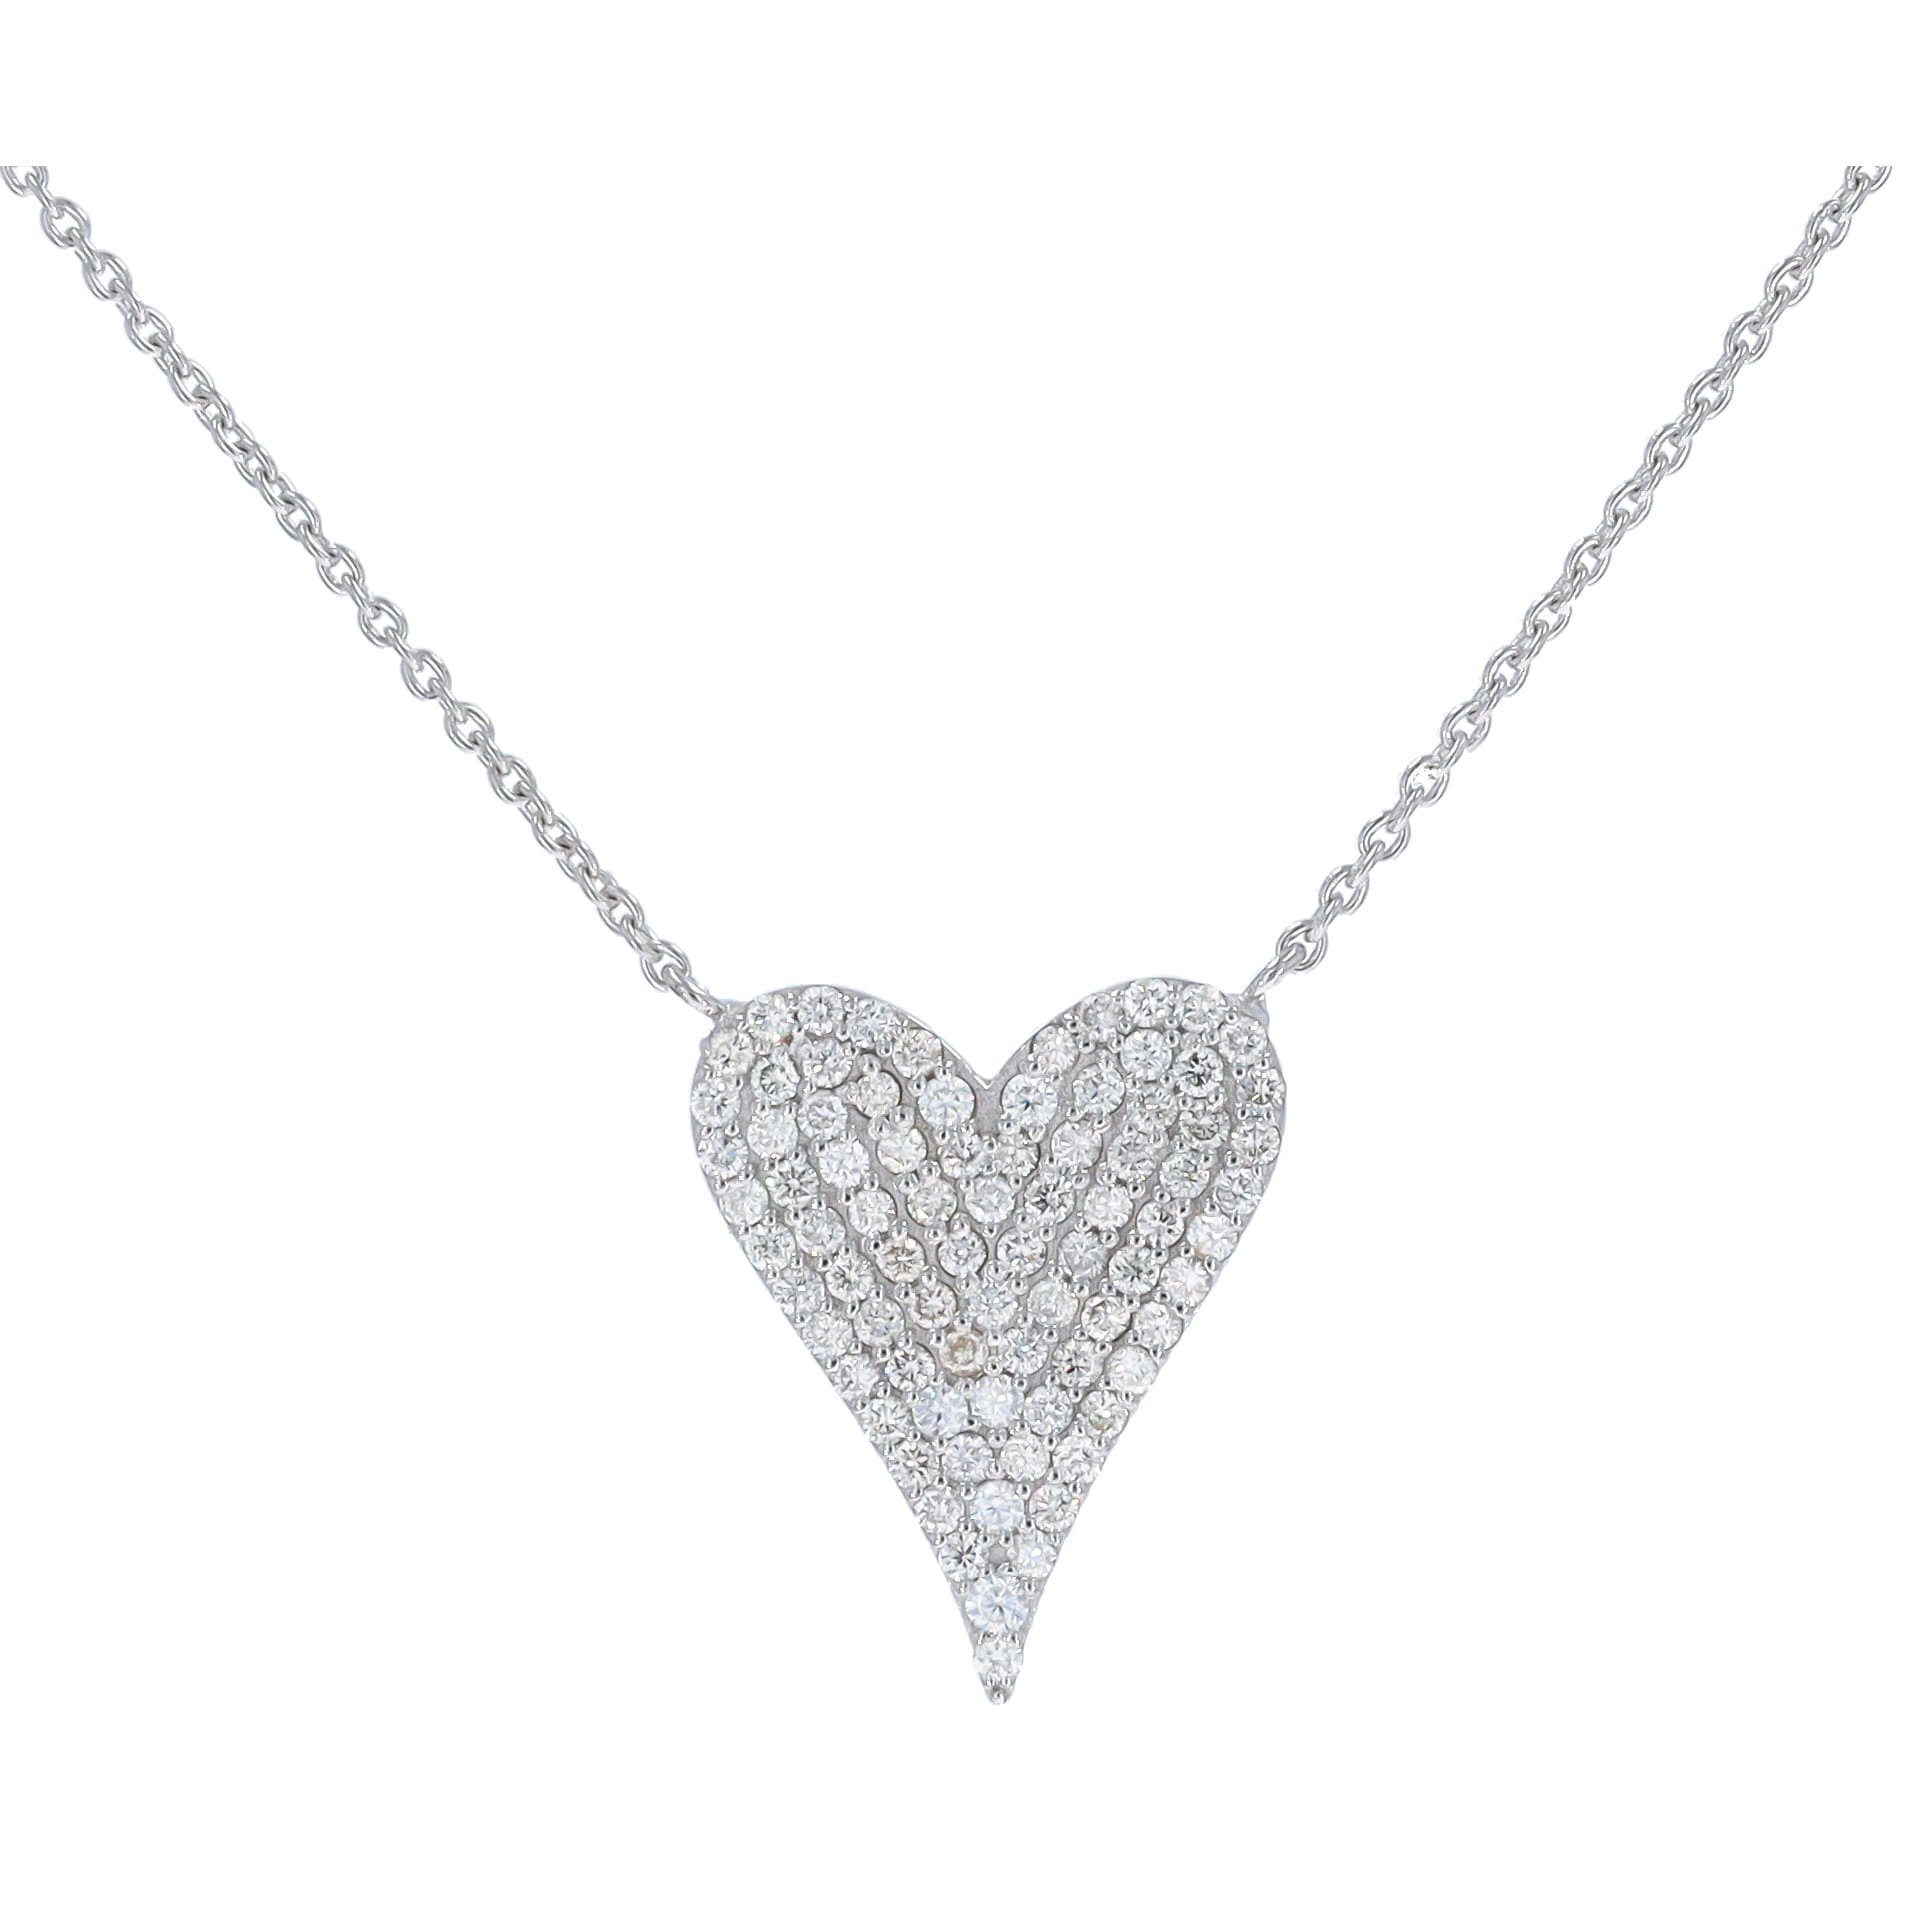 14k White Gold and Pave Diamonds Heart Necklace